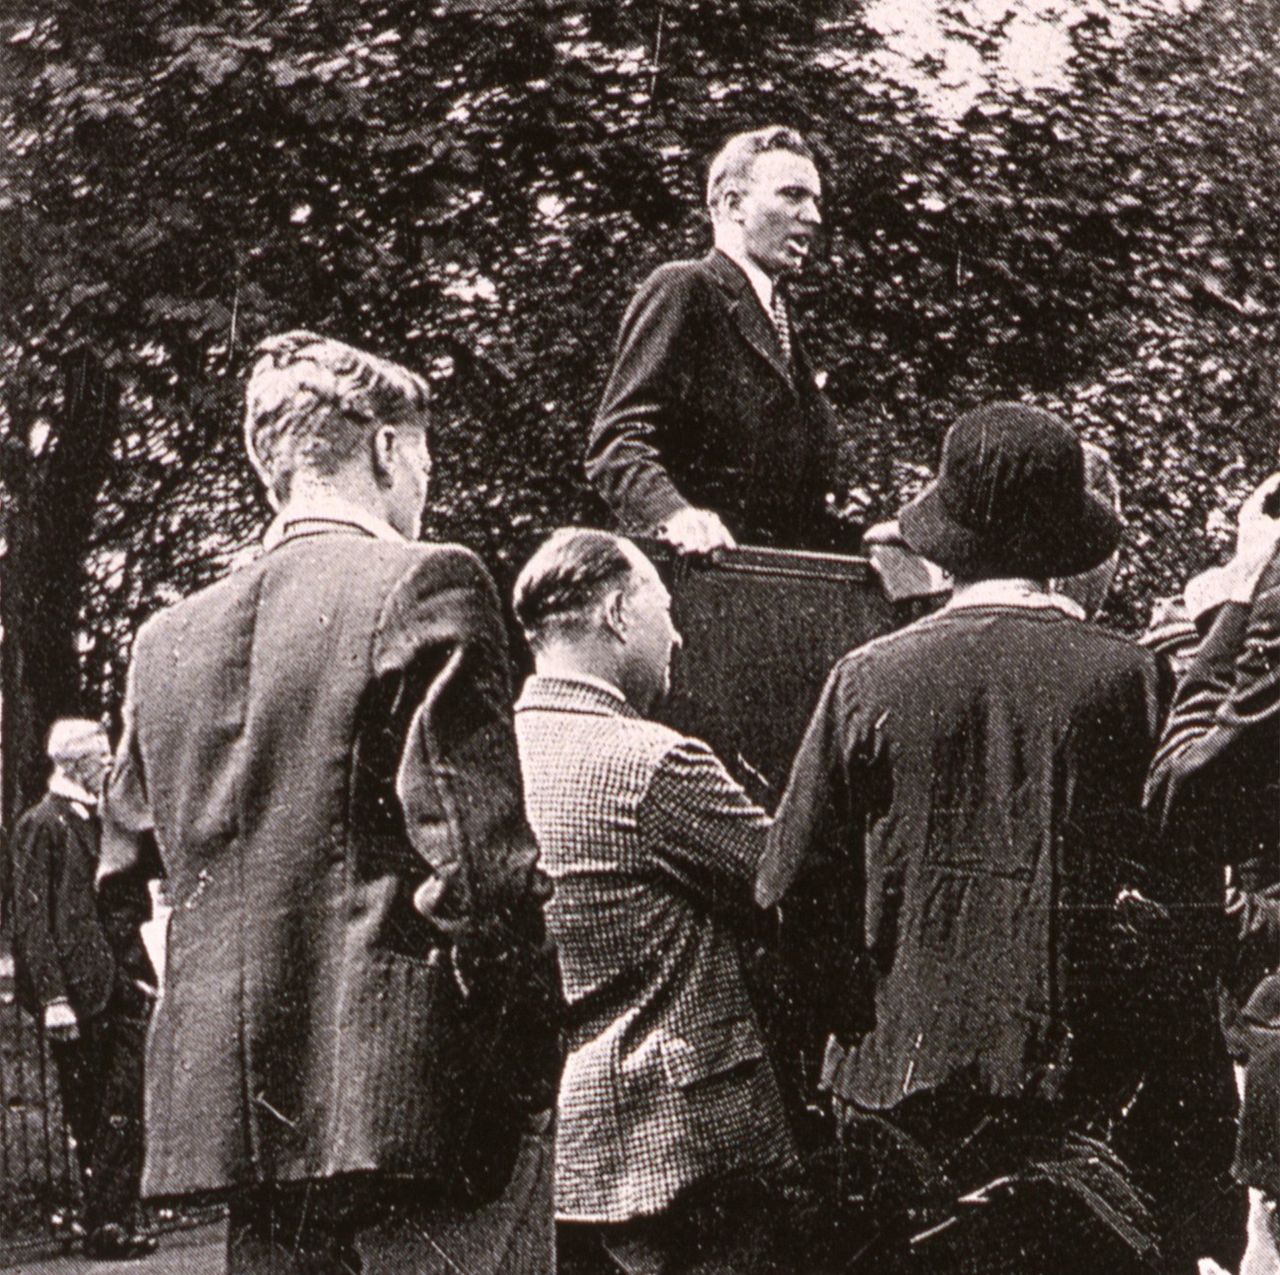 Gordon B. Hinckley as a missionary speaking in Hyde Park, London, England, in 1934.